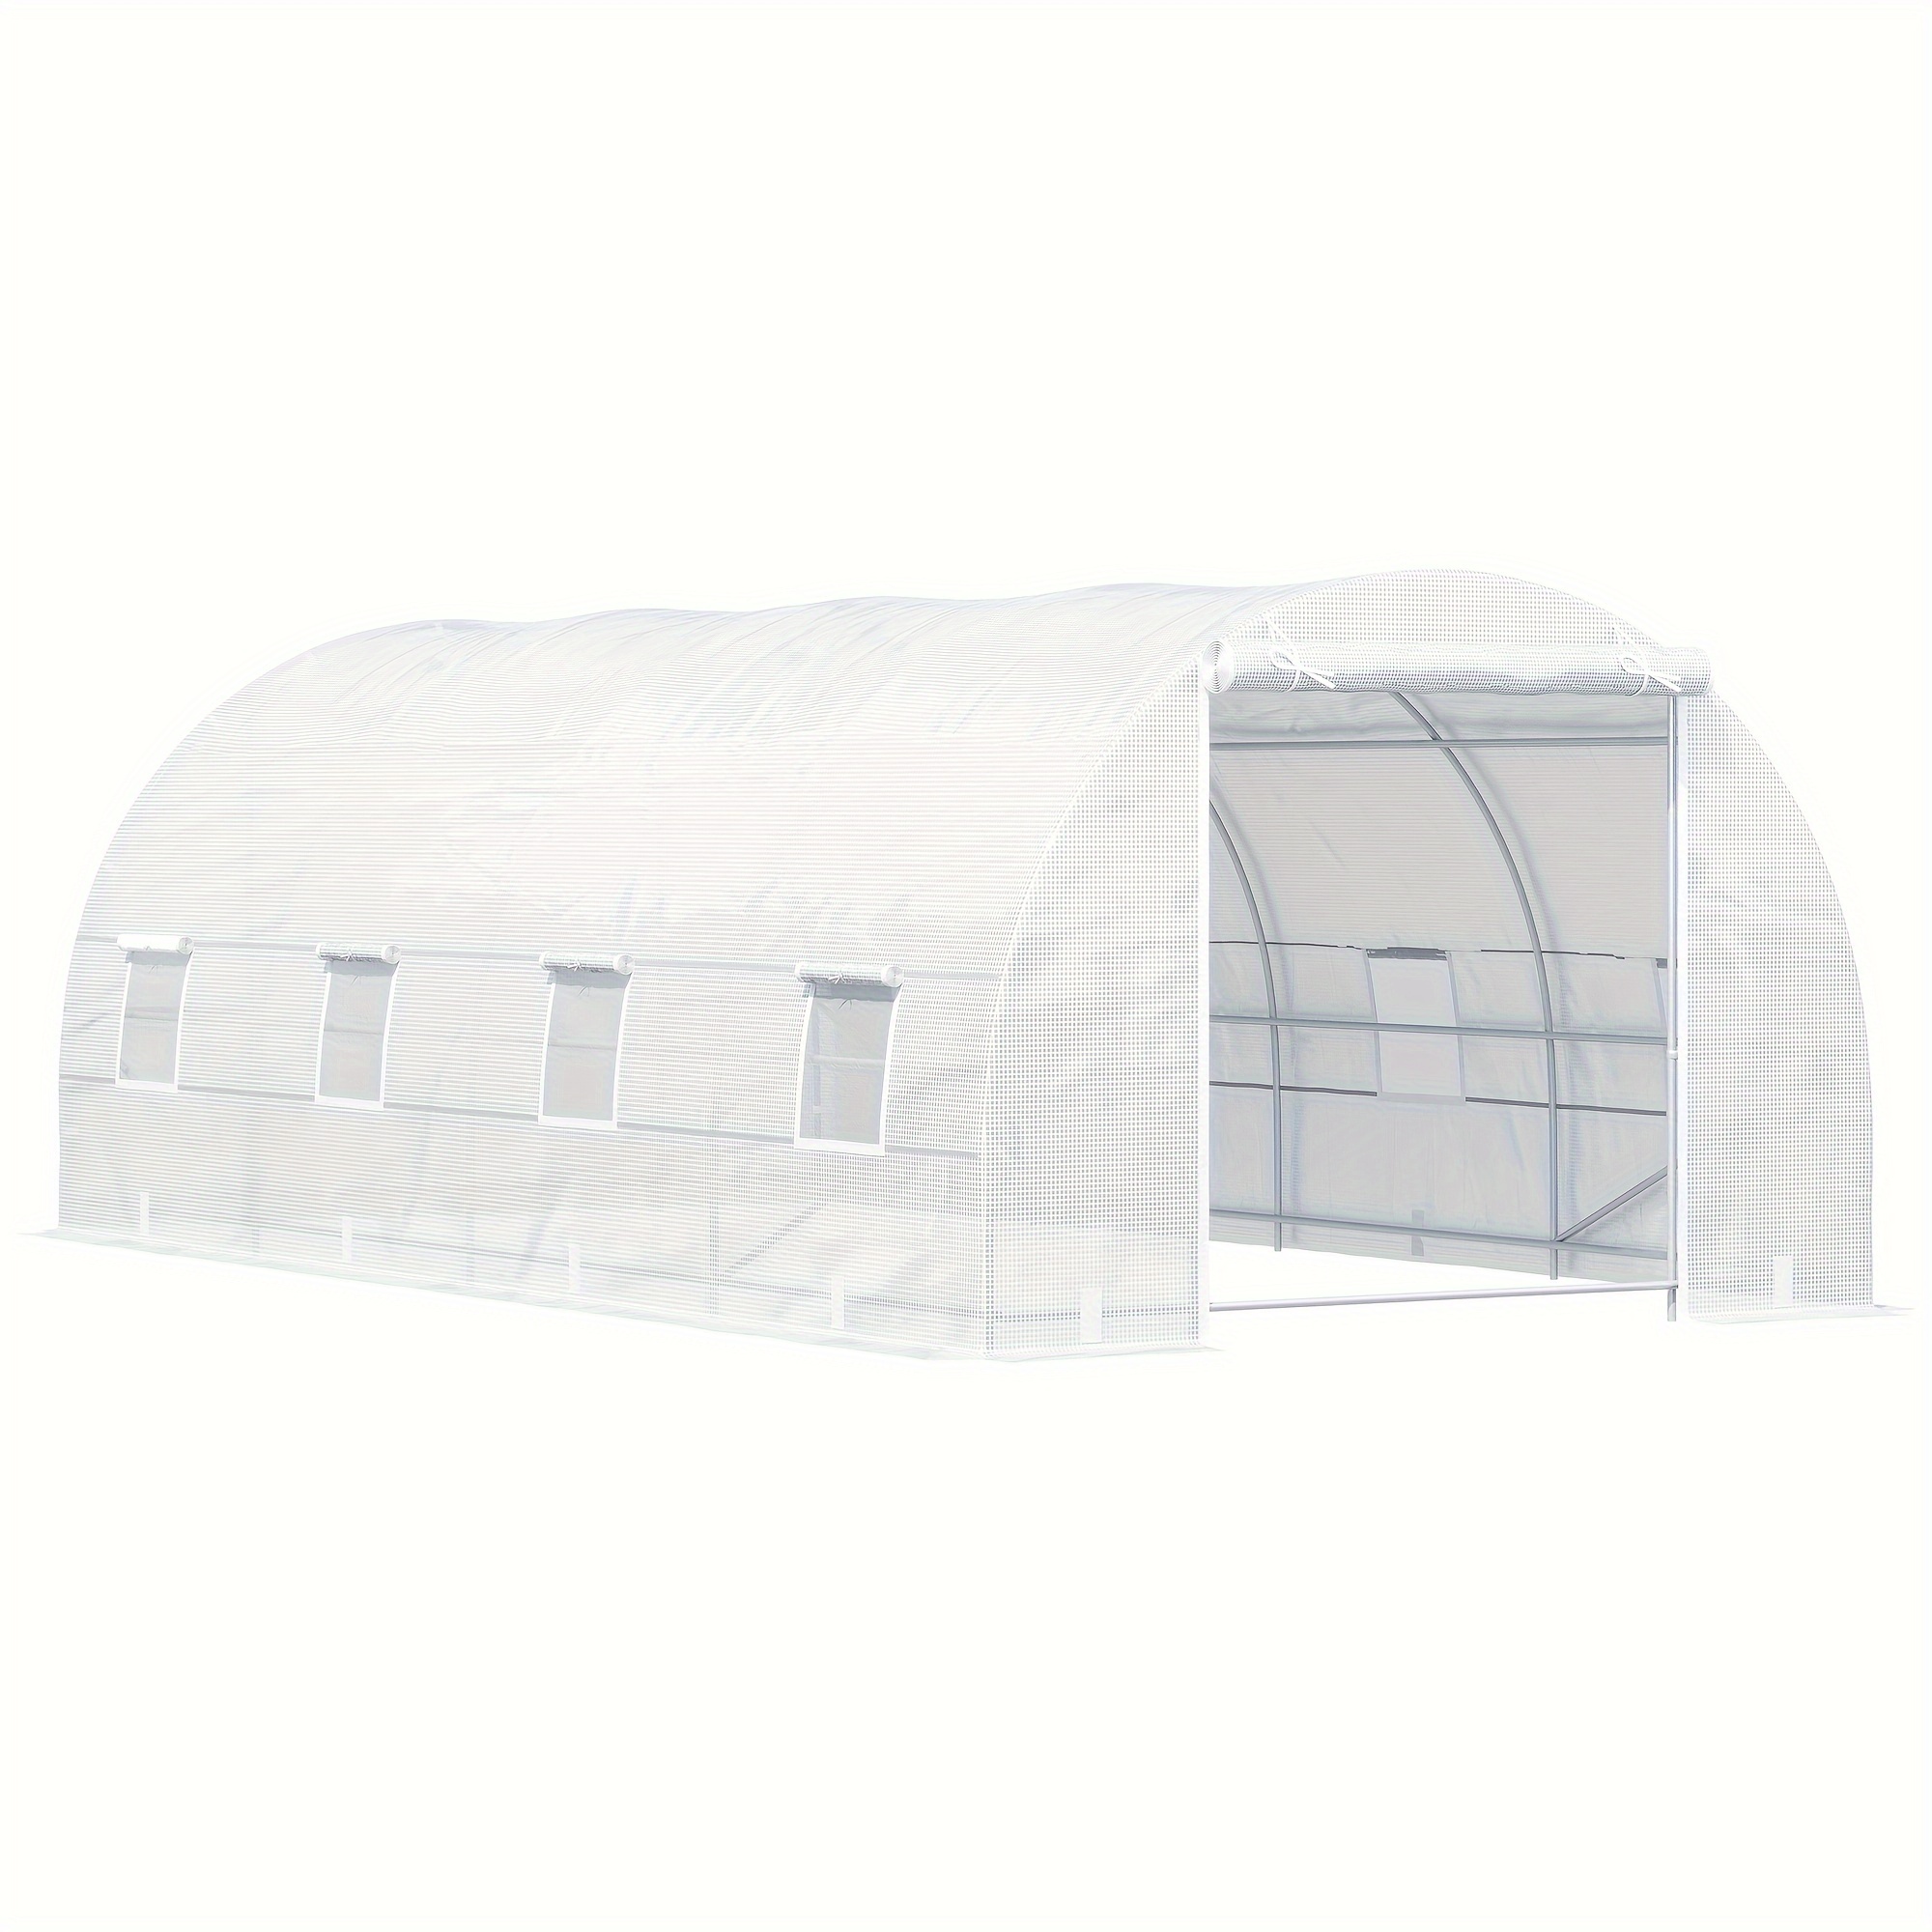 

Outsunny 20' X 10' X 7' Walk-in Tunnel Greenhouse With Zippered Door & 8 Mesh Windows, Large Garden Green House Kit, Galvanized Steel Frame, White